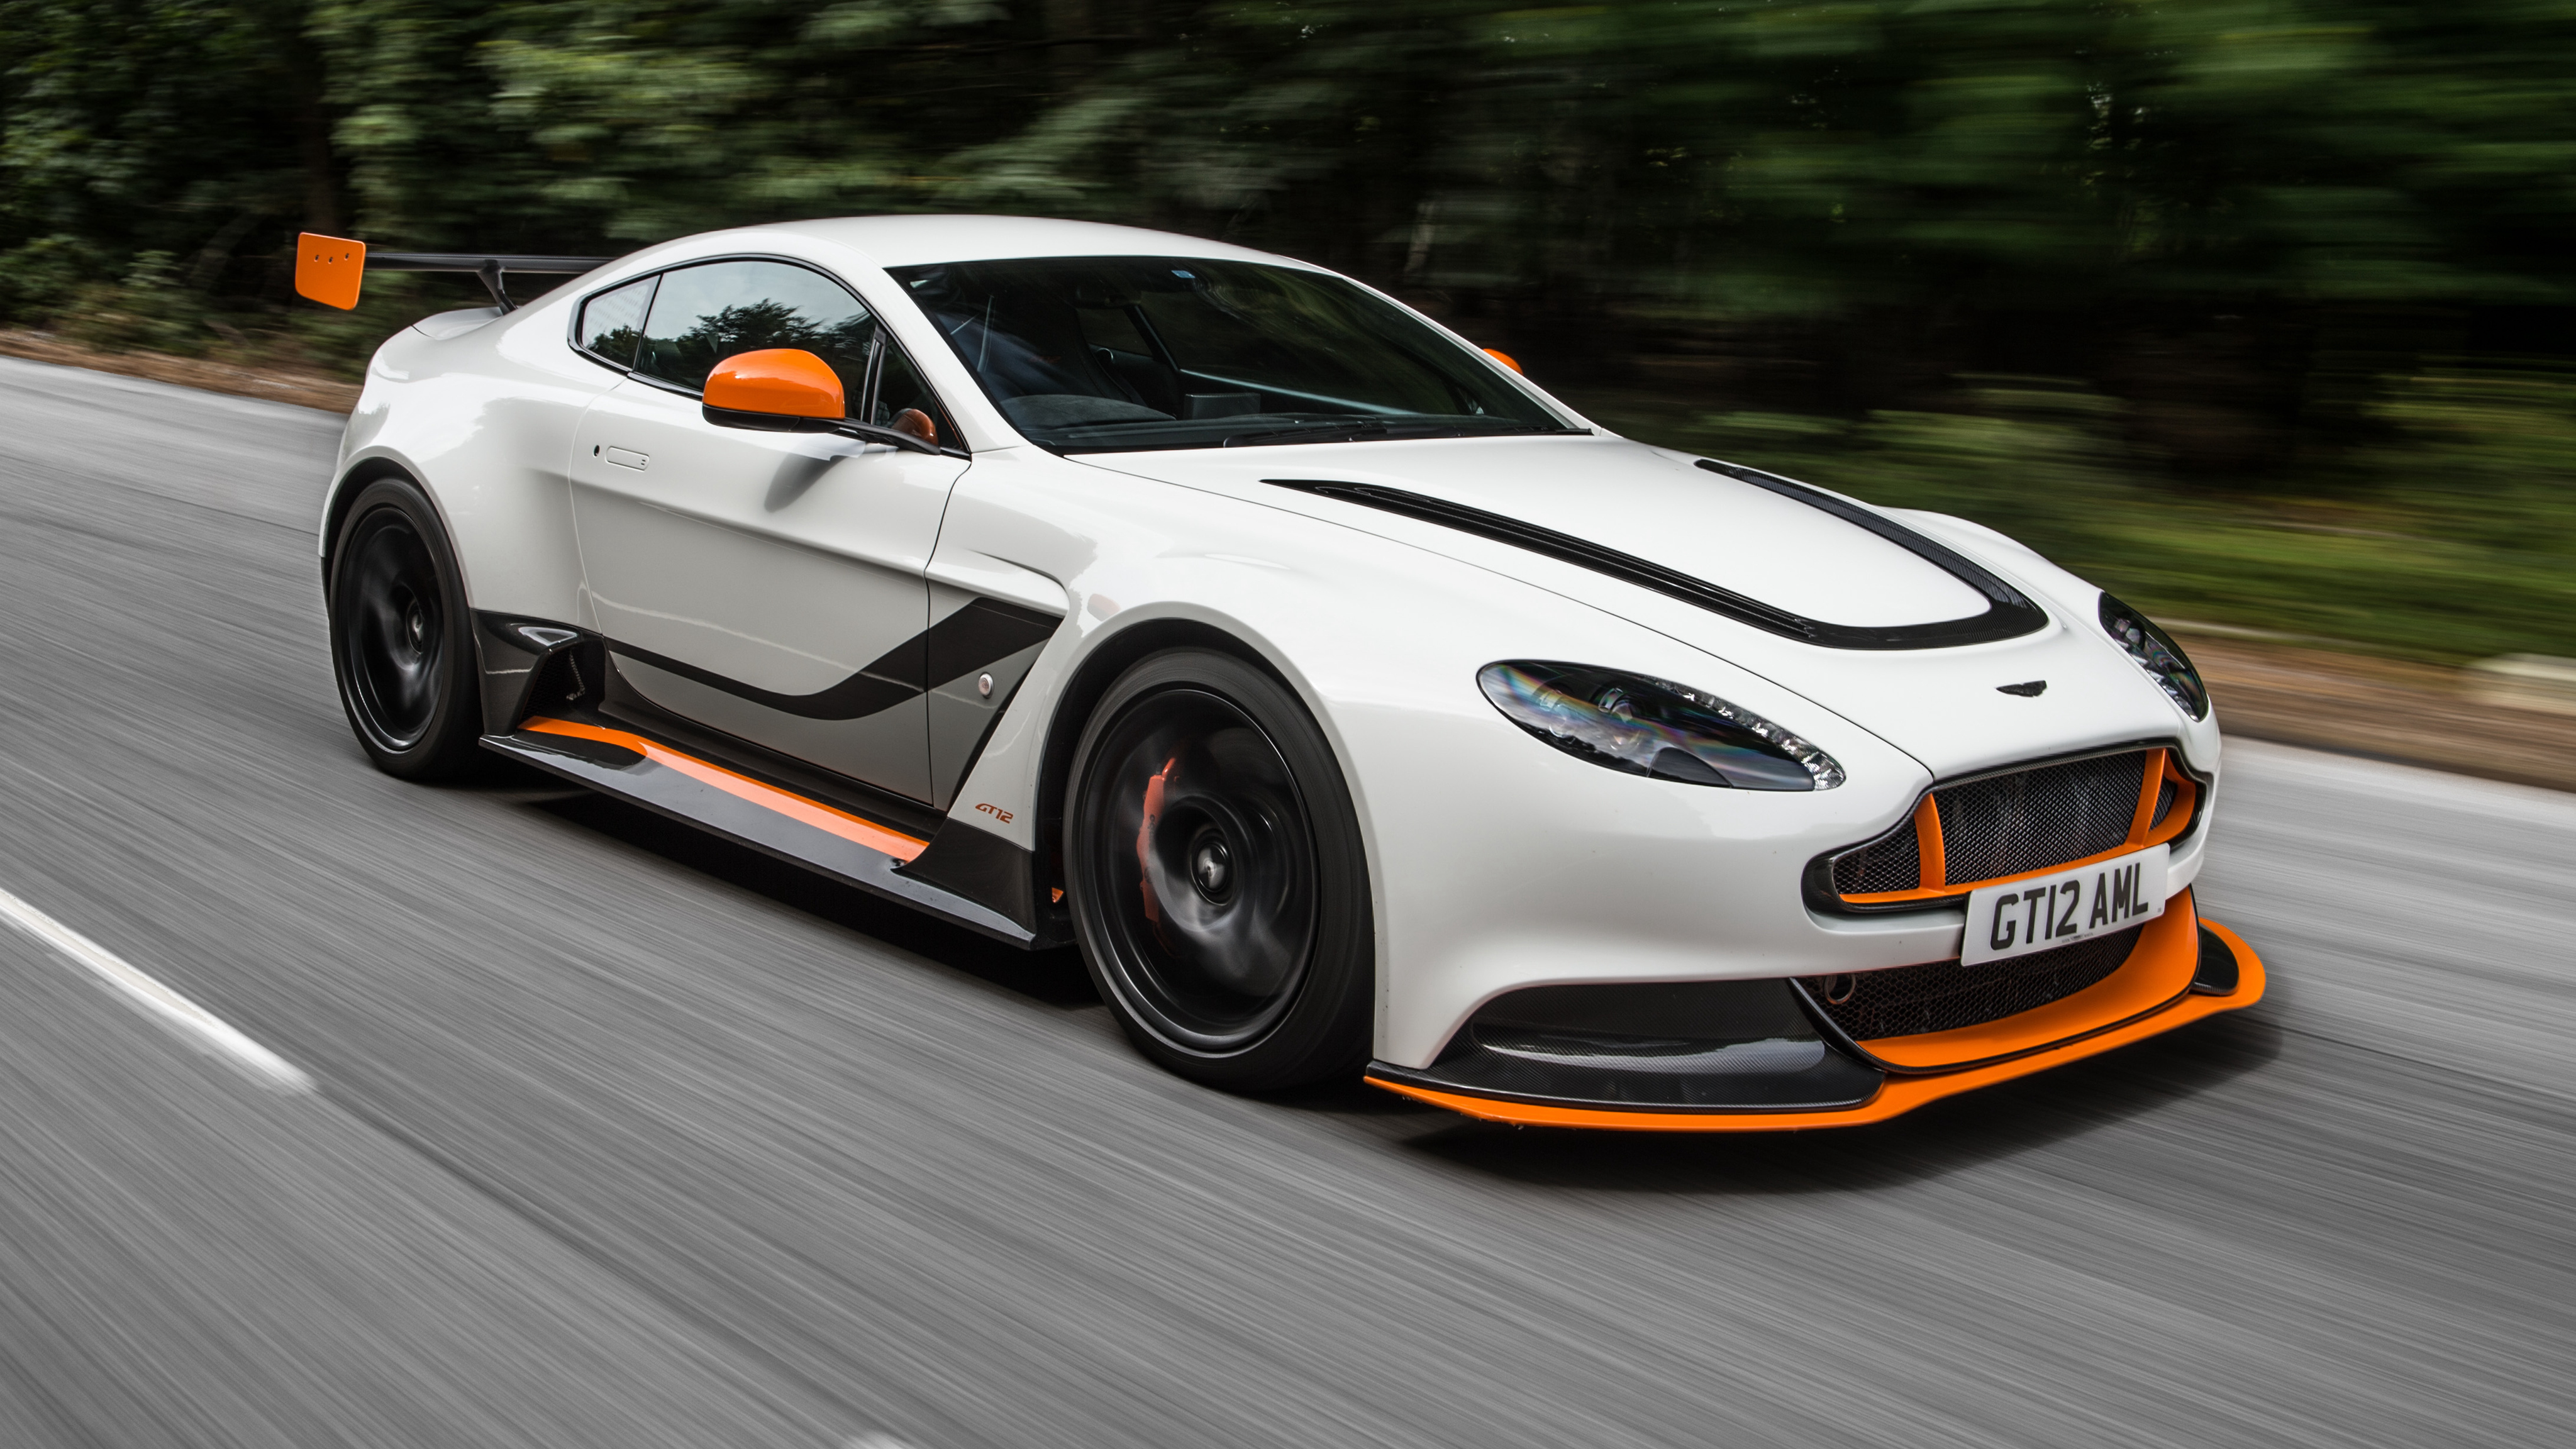 136205 download wallpaper aston martin, cars, traffic, movement, side view, vantage screensavers and pictures for free